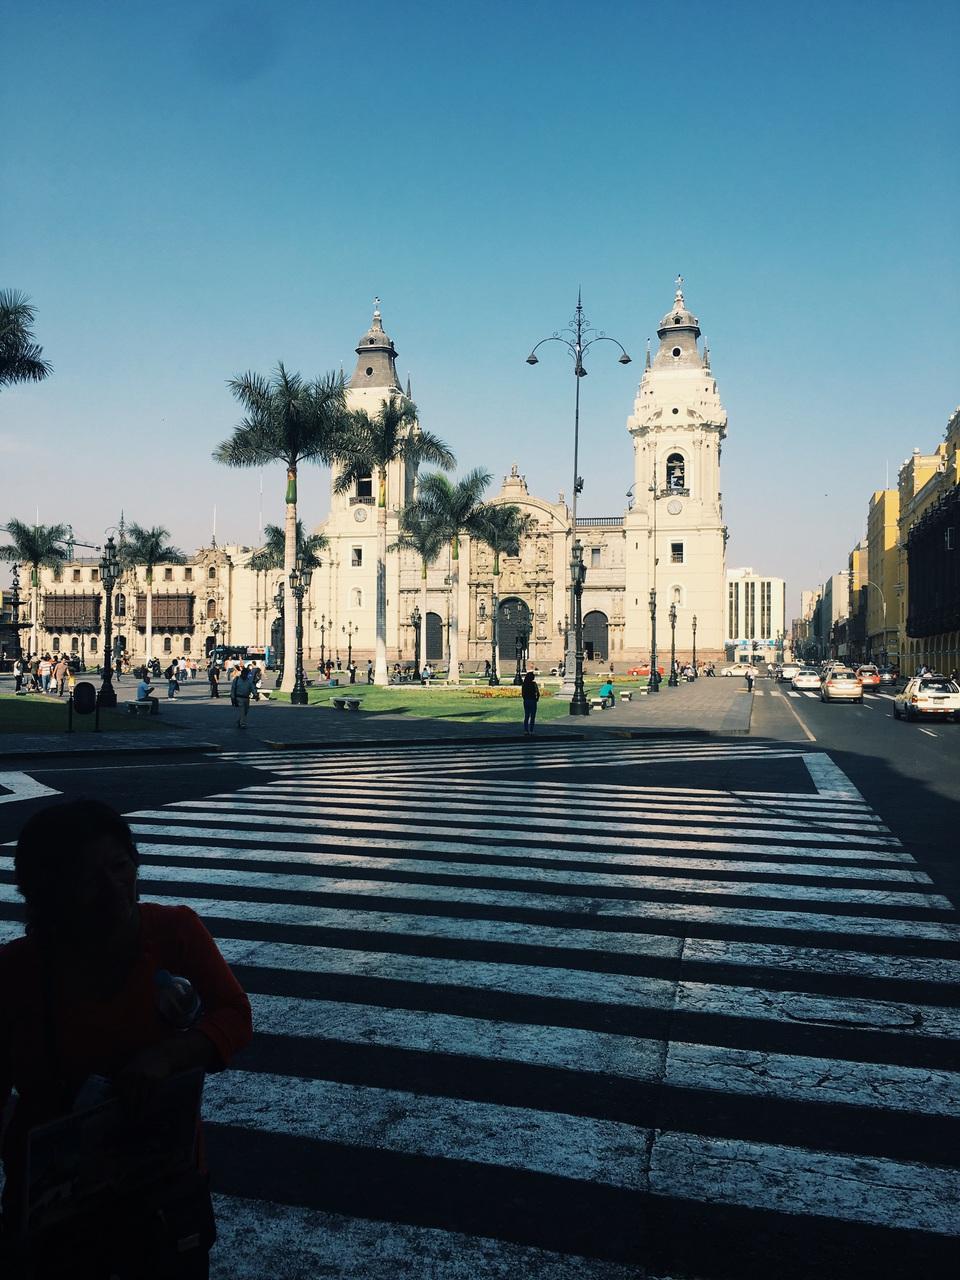 wallpaper #cathedral #lima #peru #vsco #photo #iphone